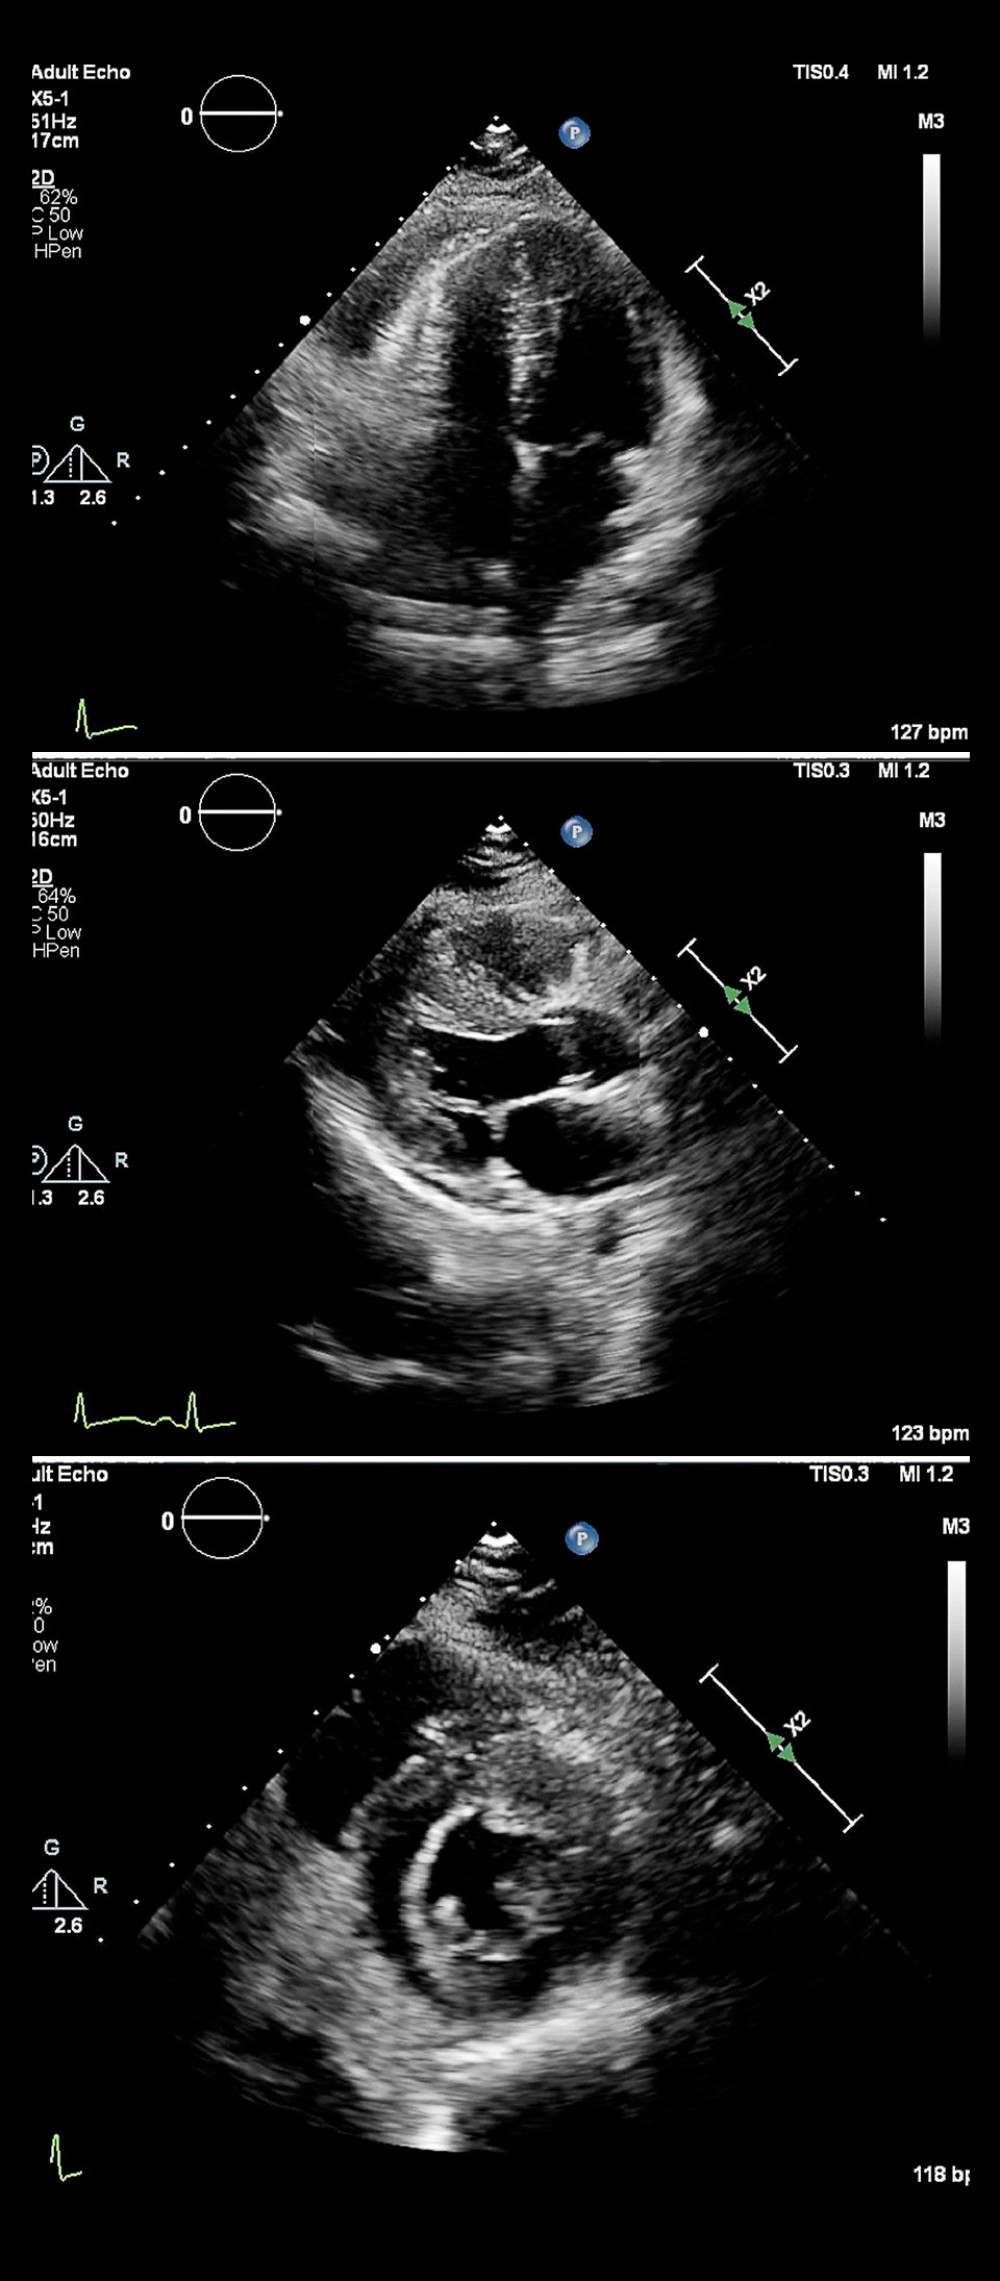 Representative images from the repeat transthoracic echocardiogram on hospital day 20, which showed resolution of the left ventricular dilation and normal ejection fraction. Top to bottom: apical 4 view, parasternal long axis view, and parasternal short axis view.